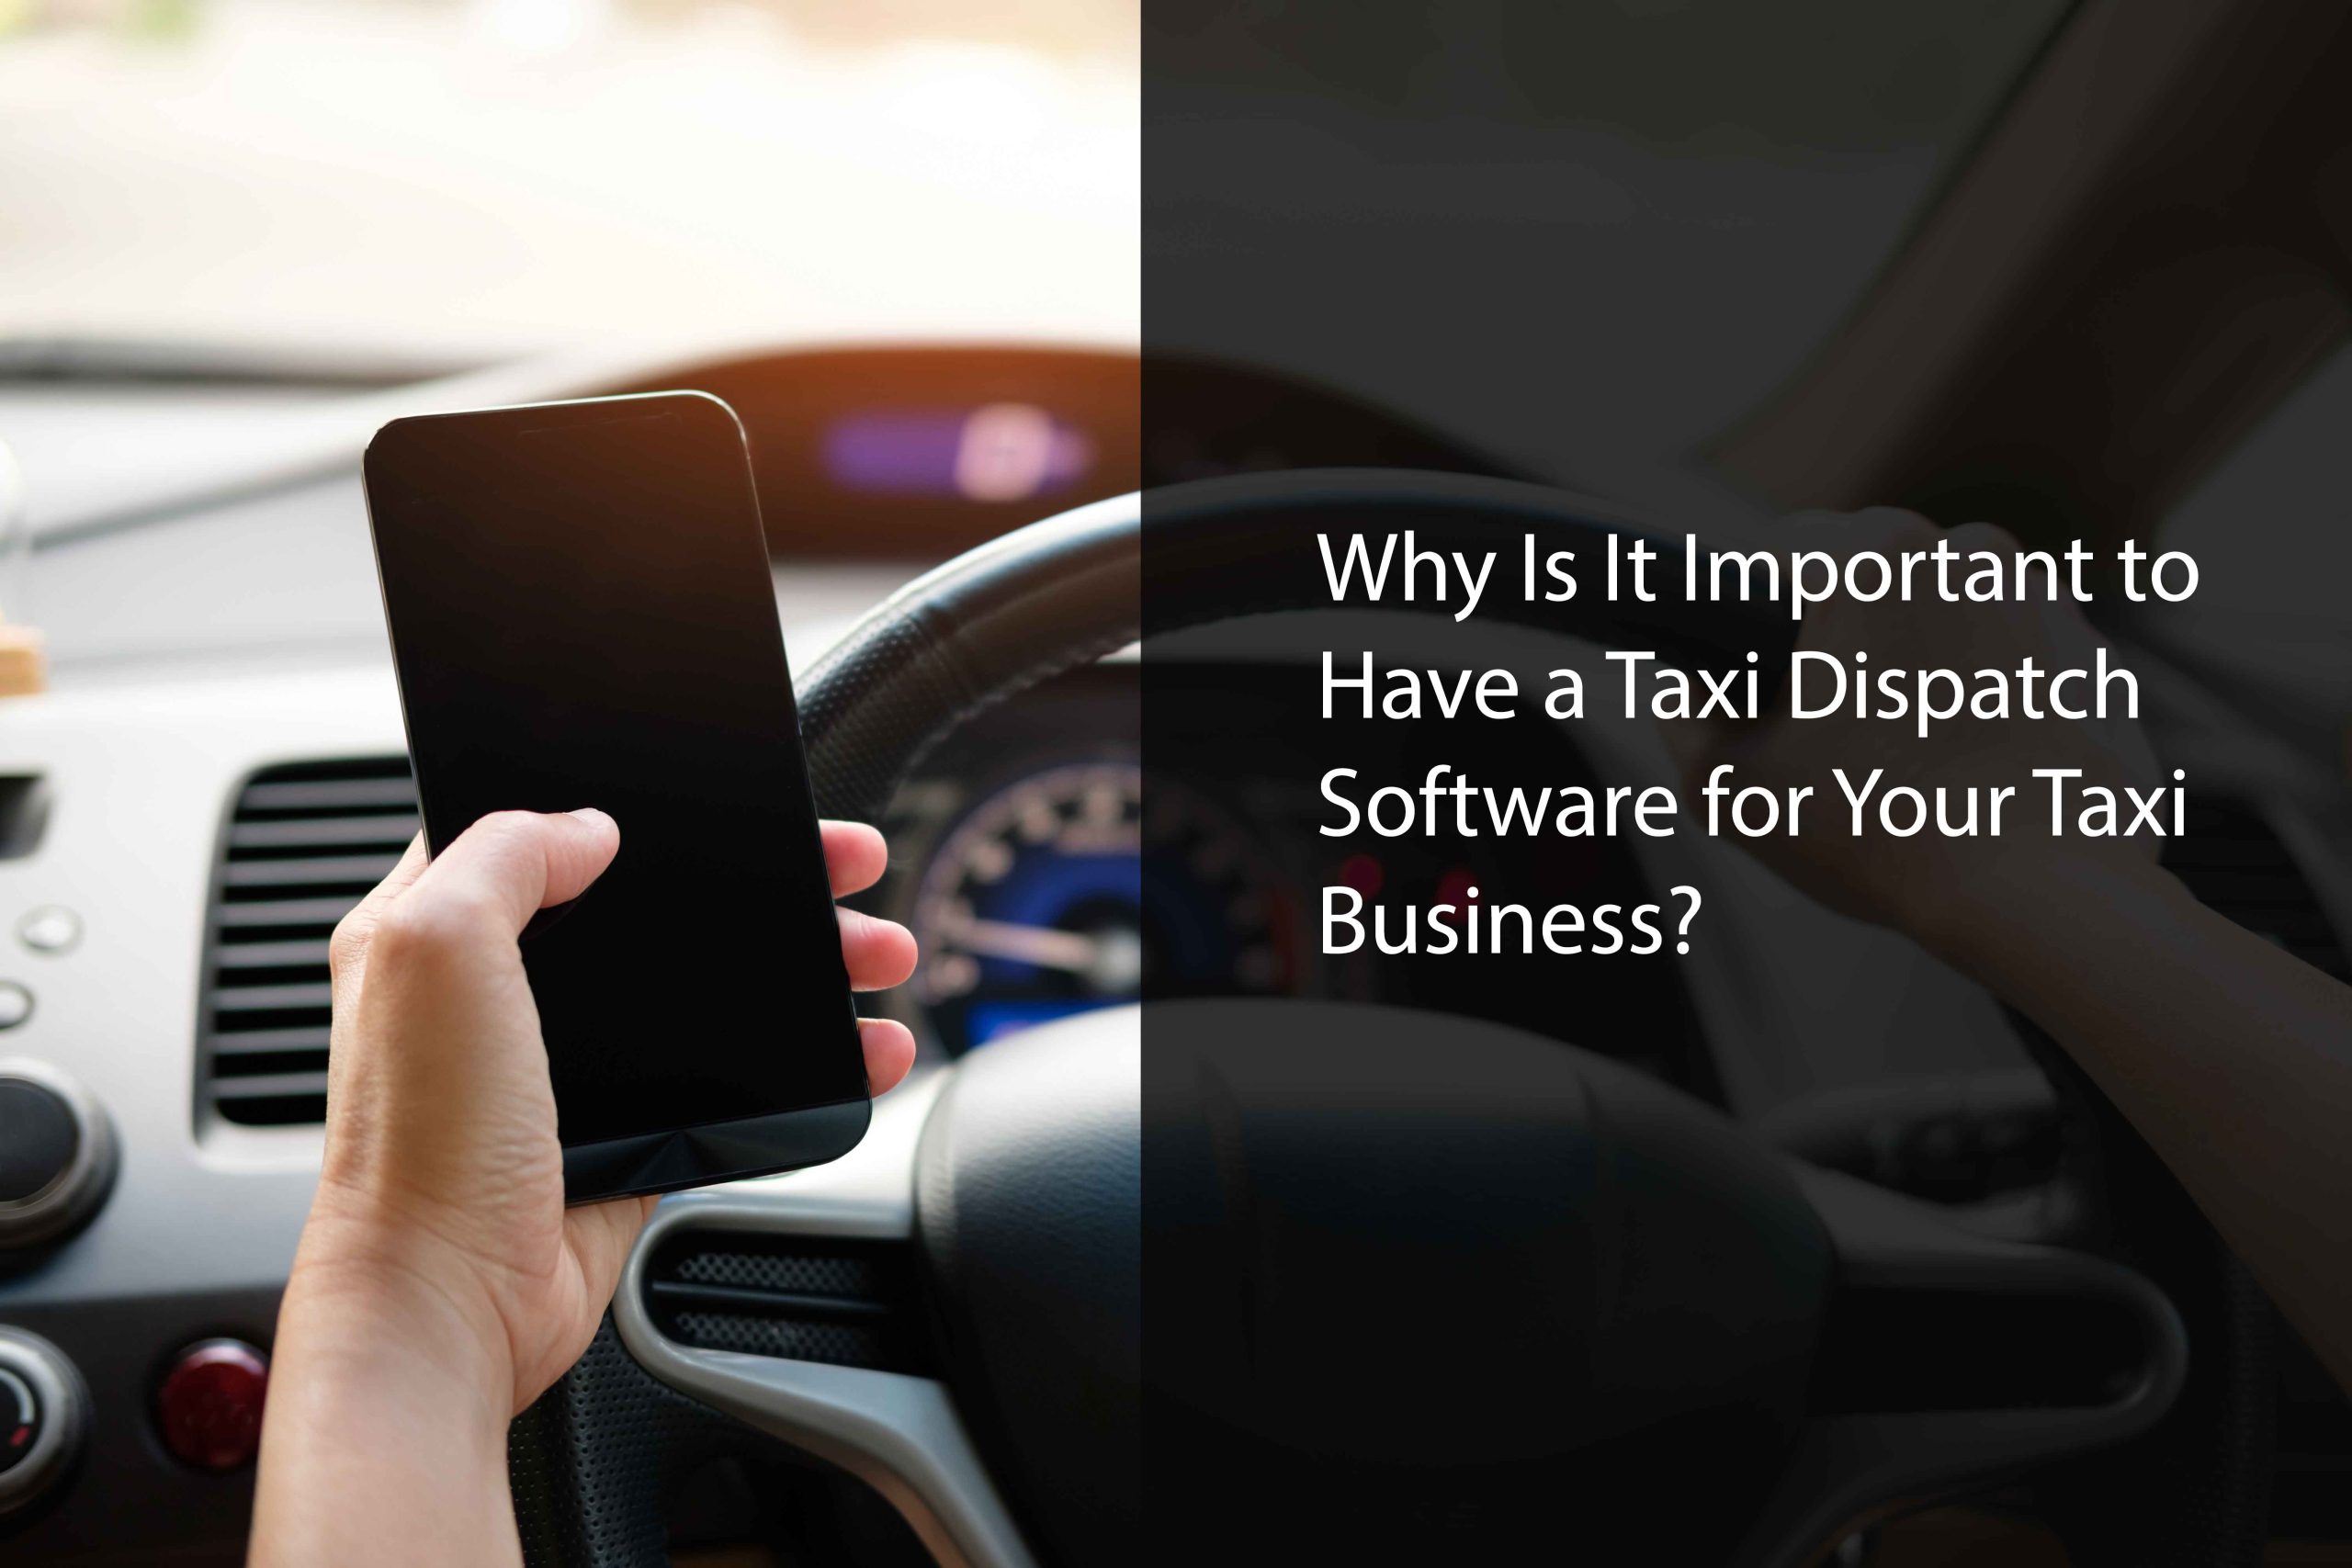 what is important to have a taxi dspatch software for your taxi business